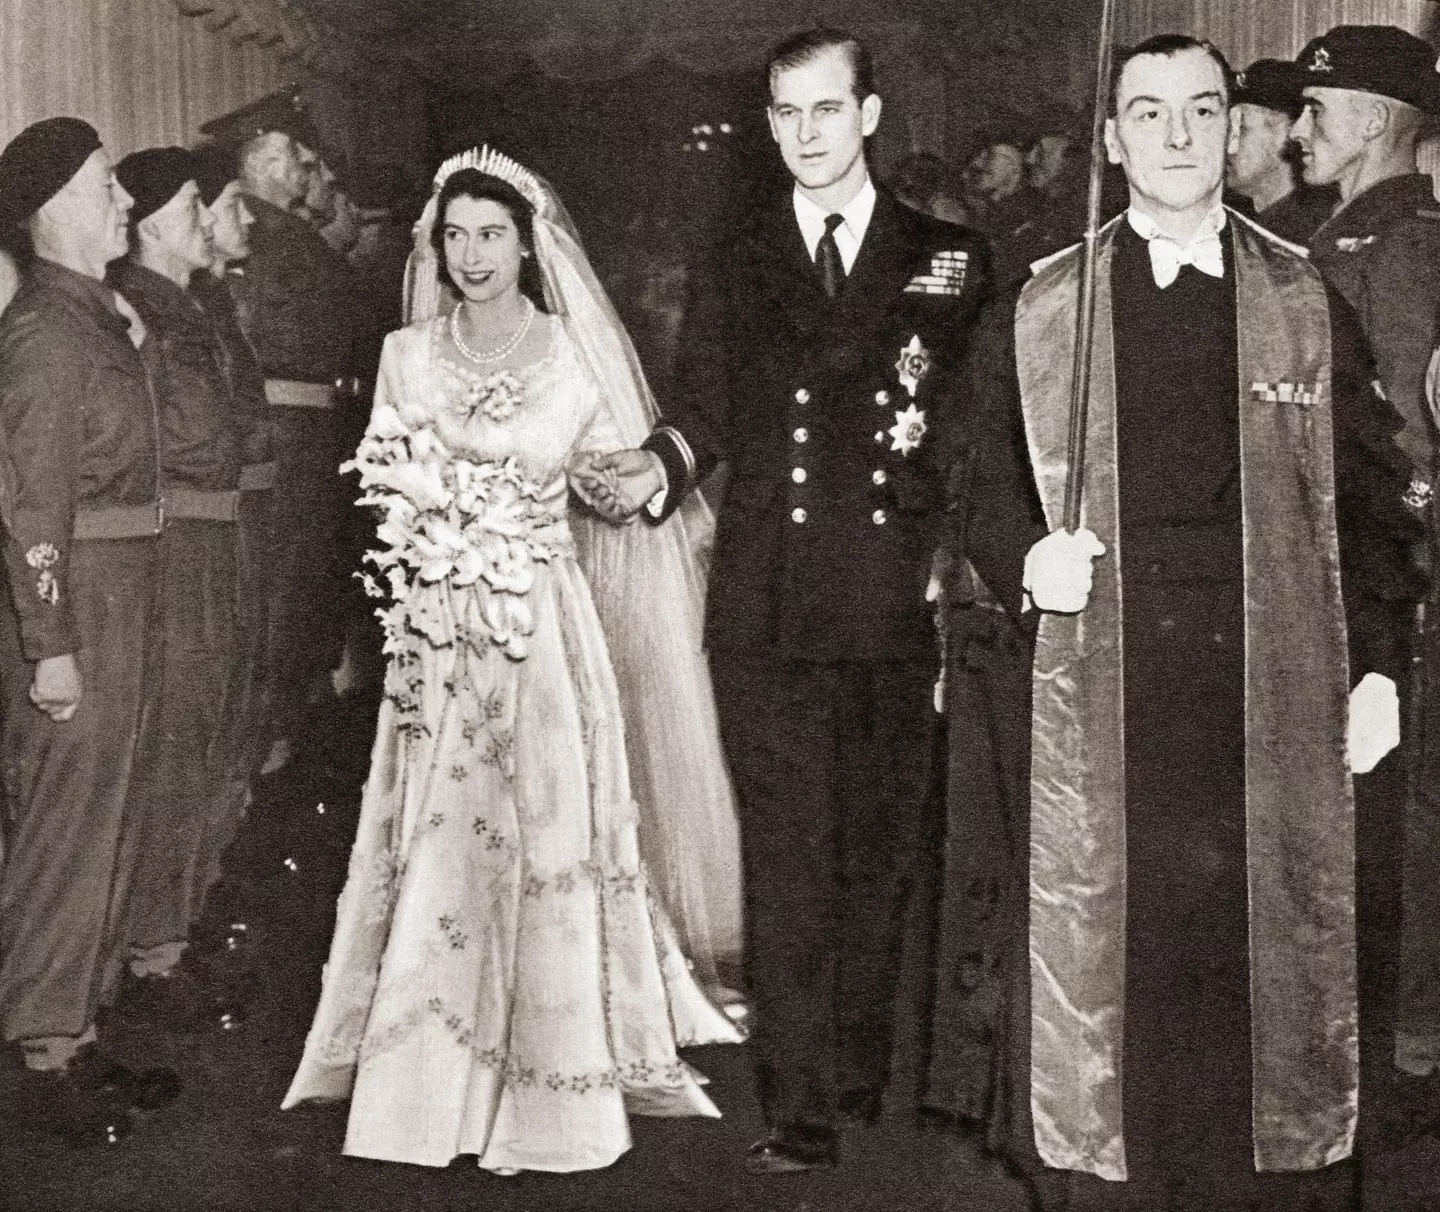 The Queen and Duke of Edinburgh on their wedding day (